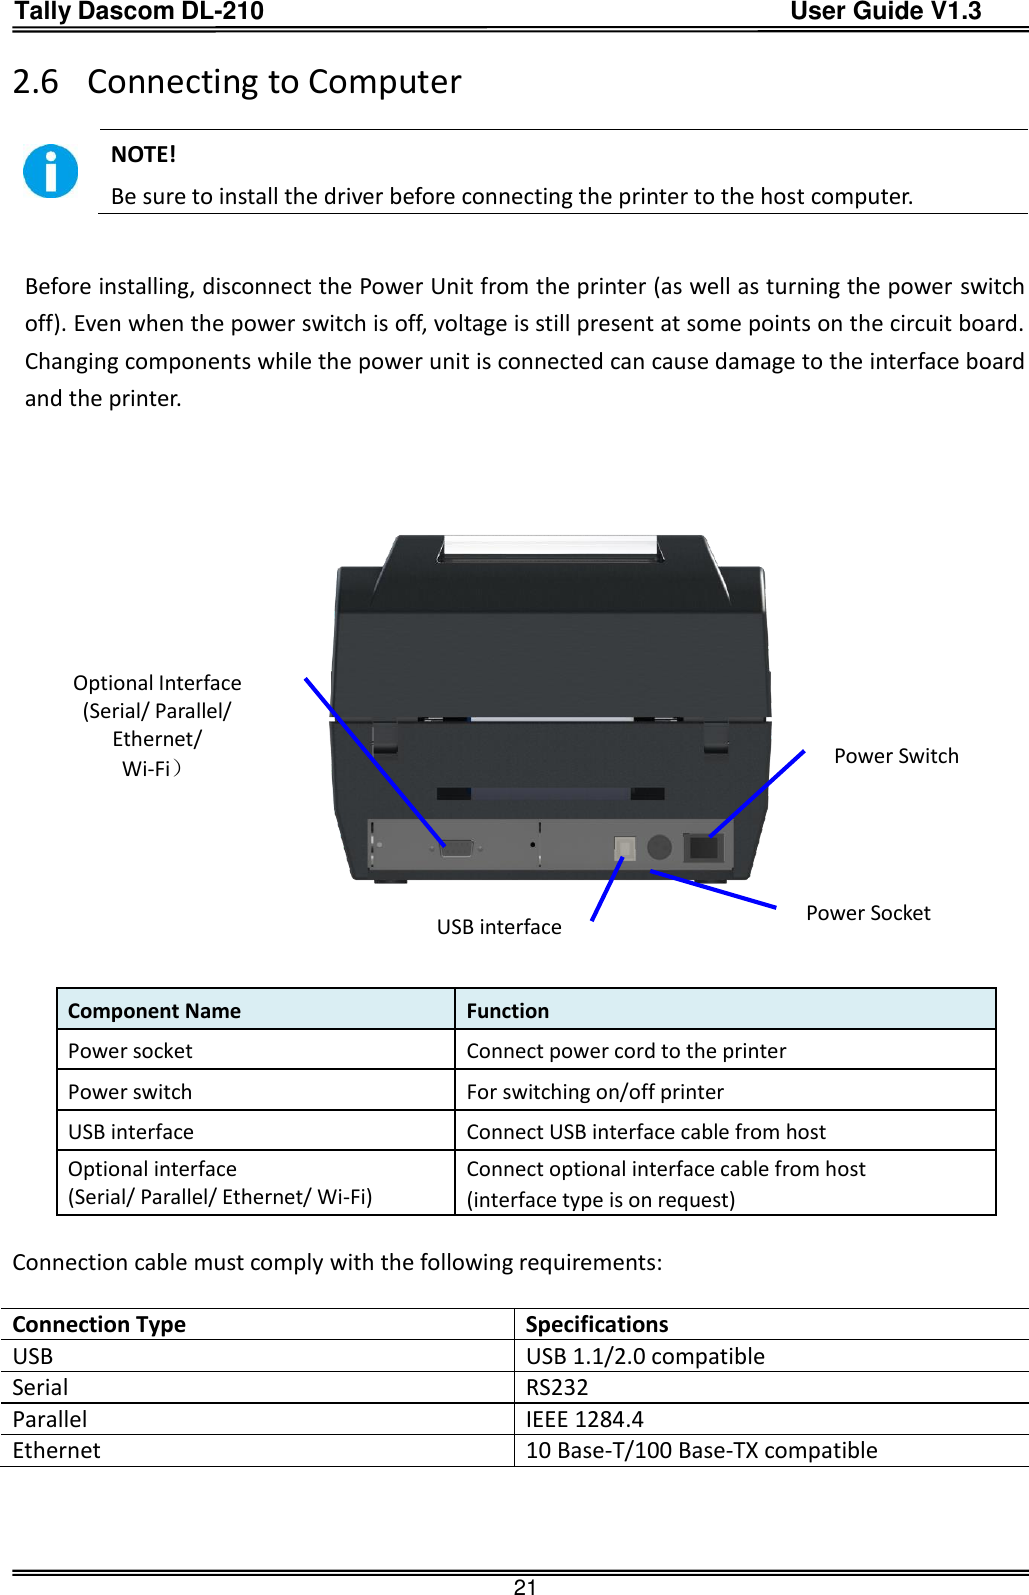 Tally Dascom DL-210                                          User Guide V1.3  21 2.6 Connecting to Computer   NOTE!   Be sure to install the driver before connecting the printer to the host computer.   Before installing, disconnect the Power Unit from the printer (as well as turning the power switch off). Even when the power switch is off, voltage is still present at some points on the circuit board. Changing components while the power unit is connected can cause damage to the interface board and the printer.        Component Name Function Power socket Connect power cord to the printer Power switch For switching on/off printer USB interface Connect USB interface cable from host Optional interface (Serial/ Parallel/ Ethernet/ Wi-Fi) Connect optional interface cable from host (interface type is on request)  Connection cable must comply with the following requirements:  Connection Type Specifications USB USB 1.1/2.0 compatible Serial RS232 Parallel IEEE 1284.4 Ethernet 10 Base-T/100 Base-TX compatible   Power Switch Optional Interface (Serial/ Parallel/ Ethernet/ Wi-Fi） USB interface Power Socket 